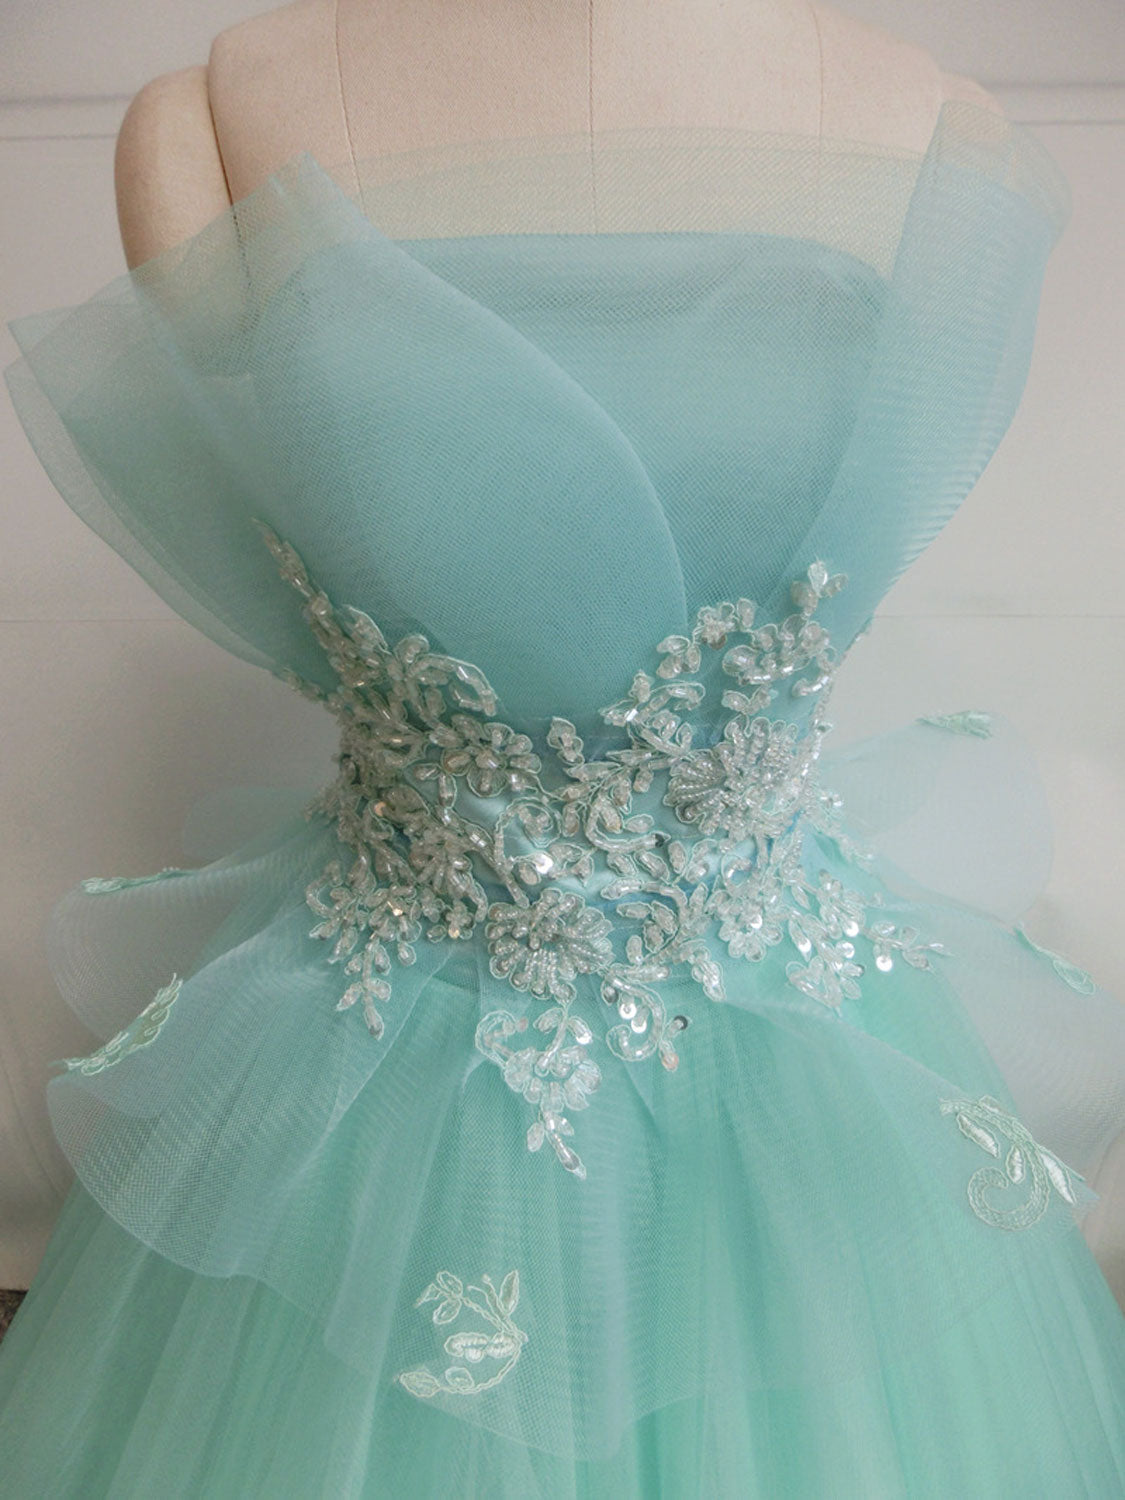 Fairytale Strapless Mint Green Tull Ball Gown Prom Dress - DollyGown